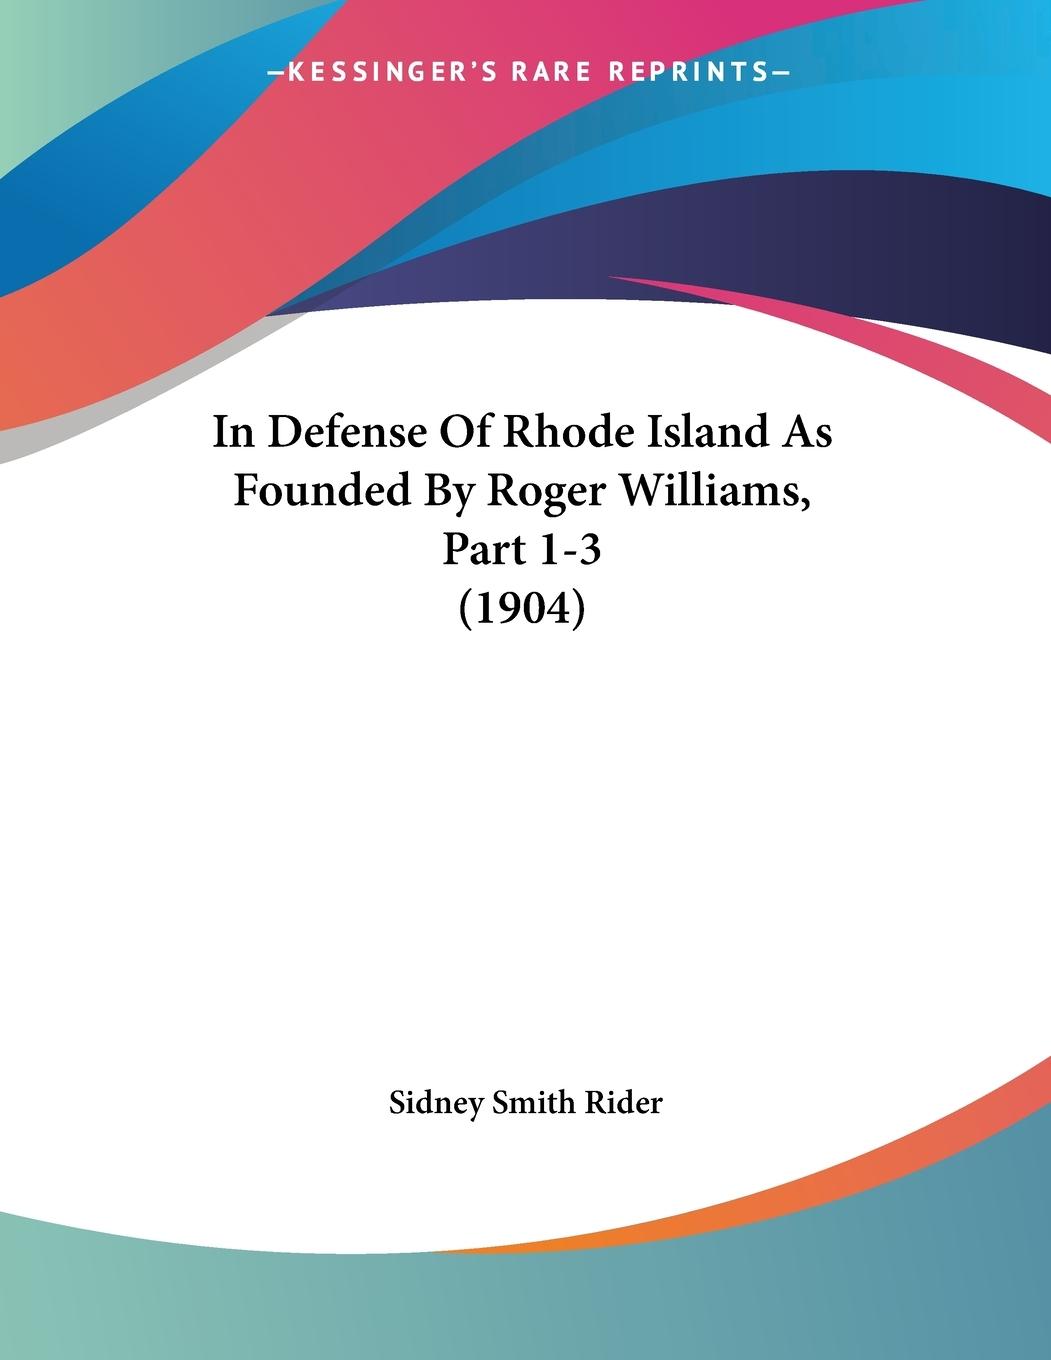 In Defense Of Rhode Island As Founded By Roger Williams, Part 1-3 (1904)